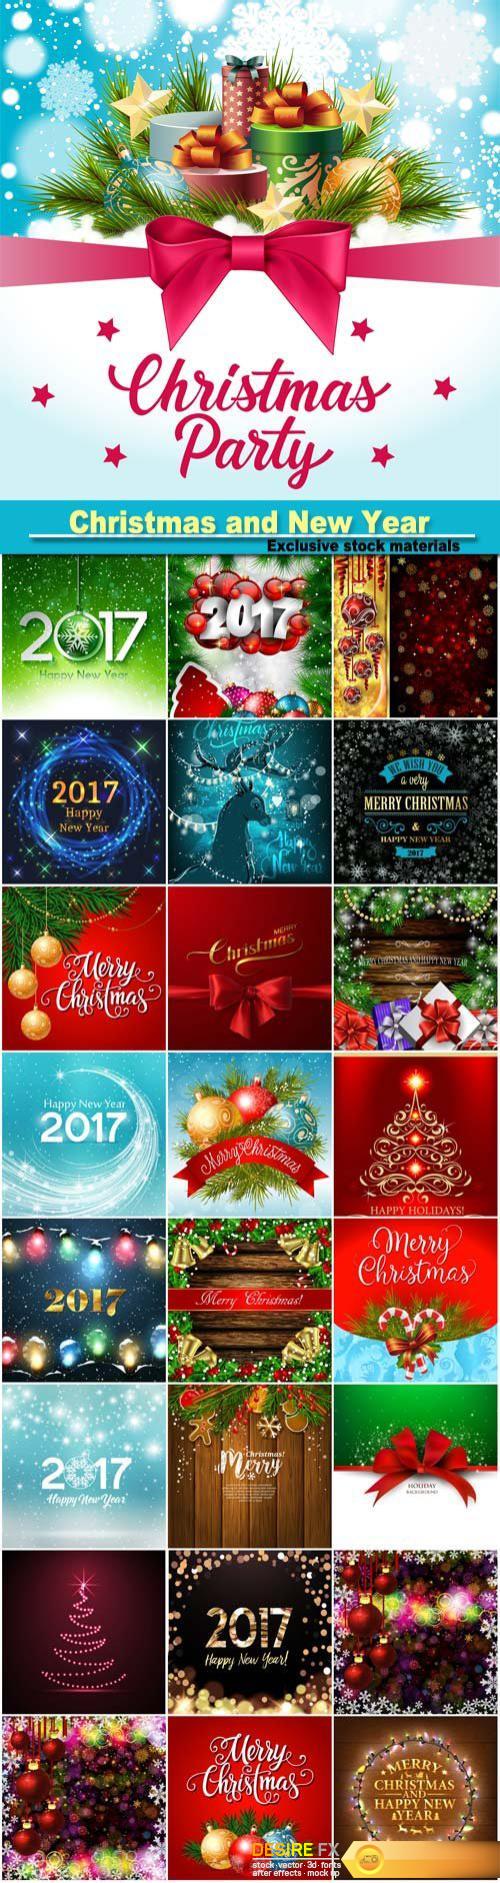 Christmas and New Year design background, christmas garland, gift boxes and snow